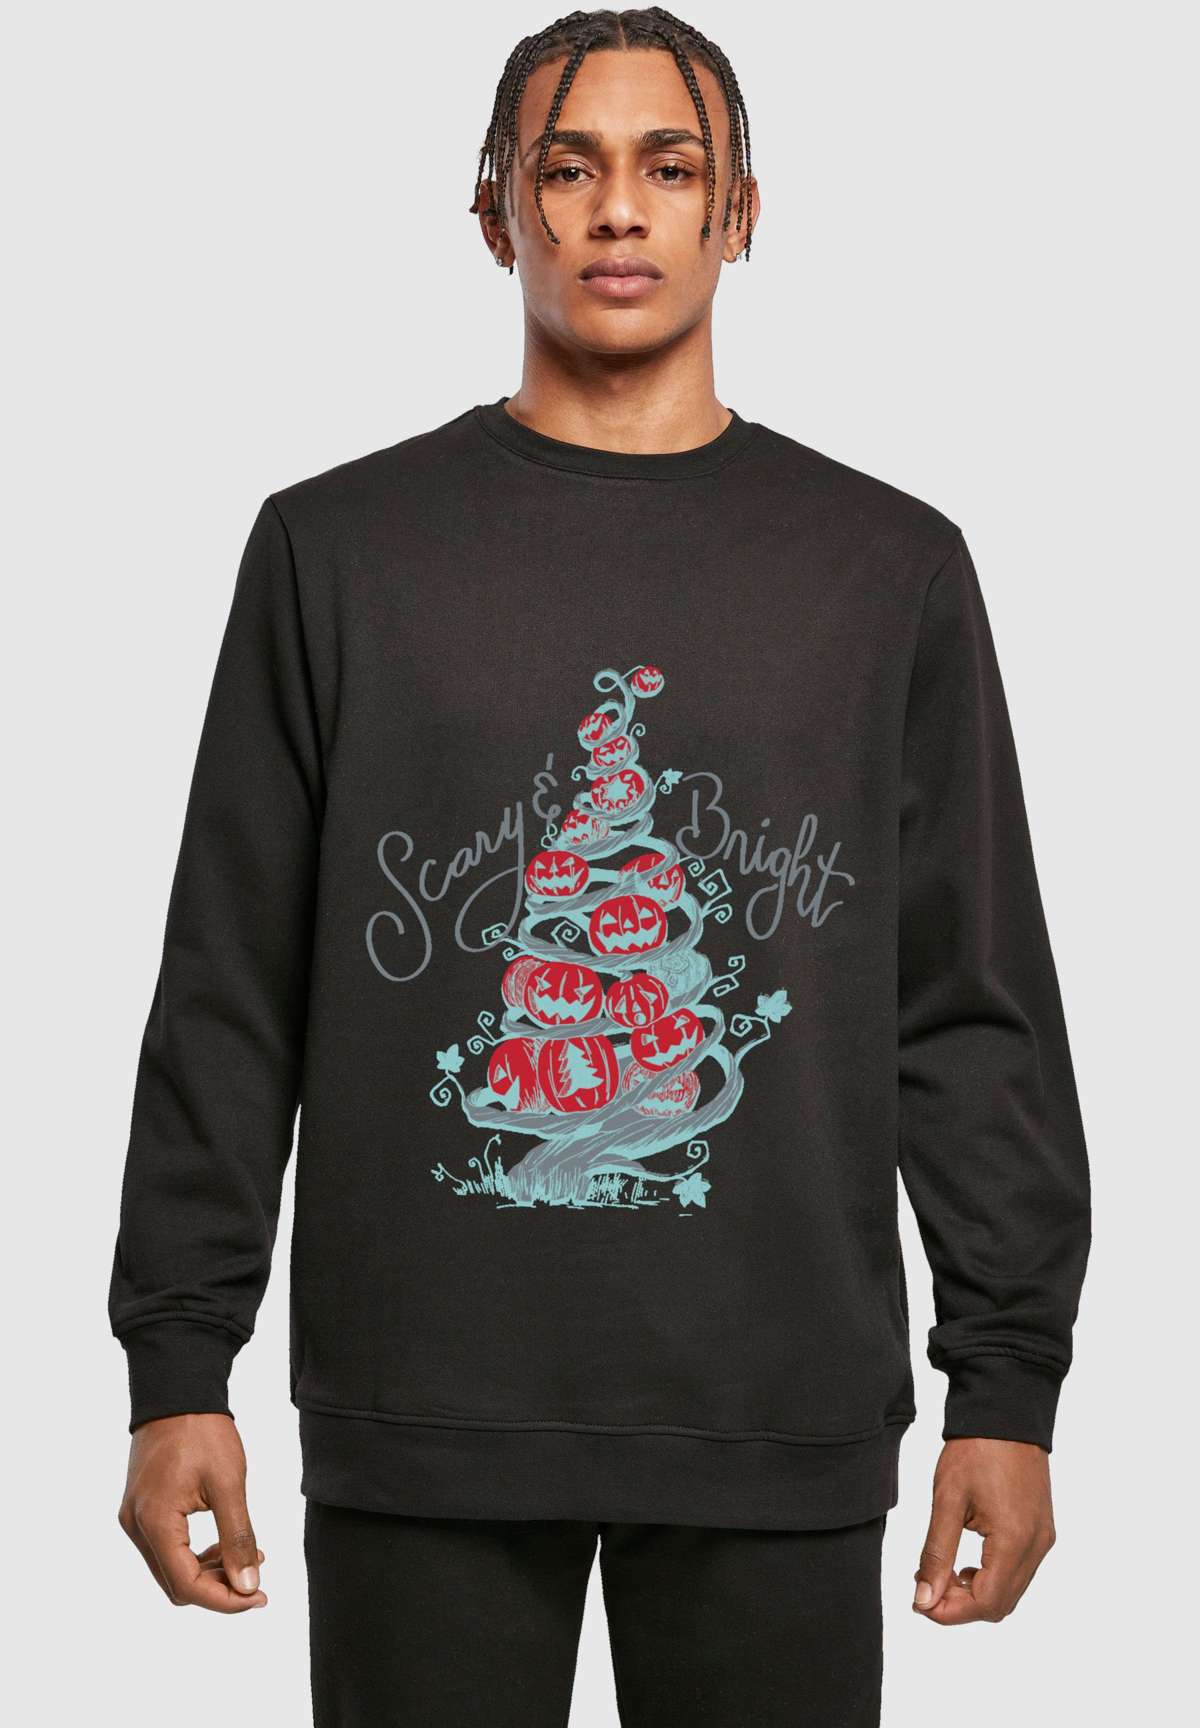 Кофта THE NIGHTMARE BEFORE CHRISTMAS-SCARY AND BRIGHT CREWNECK